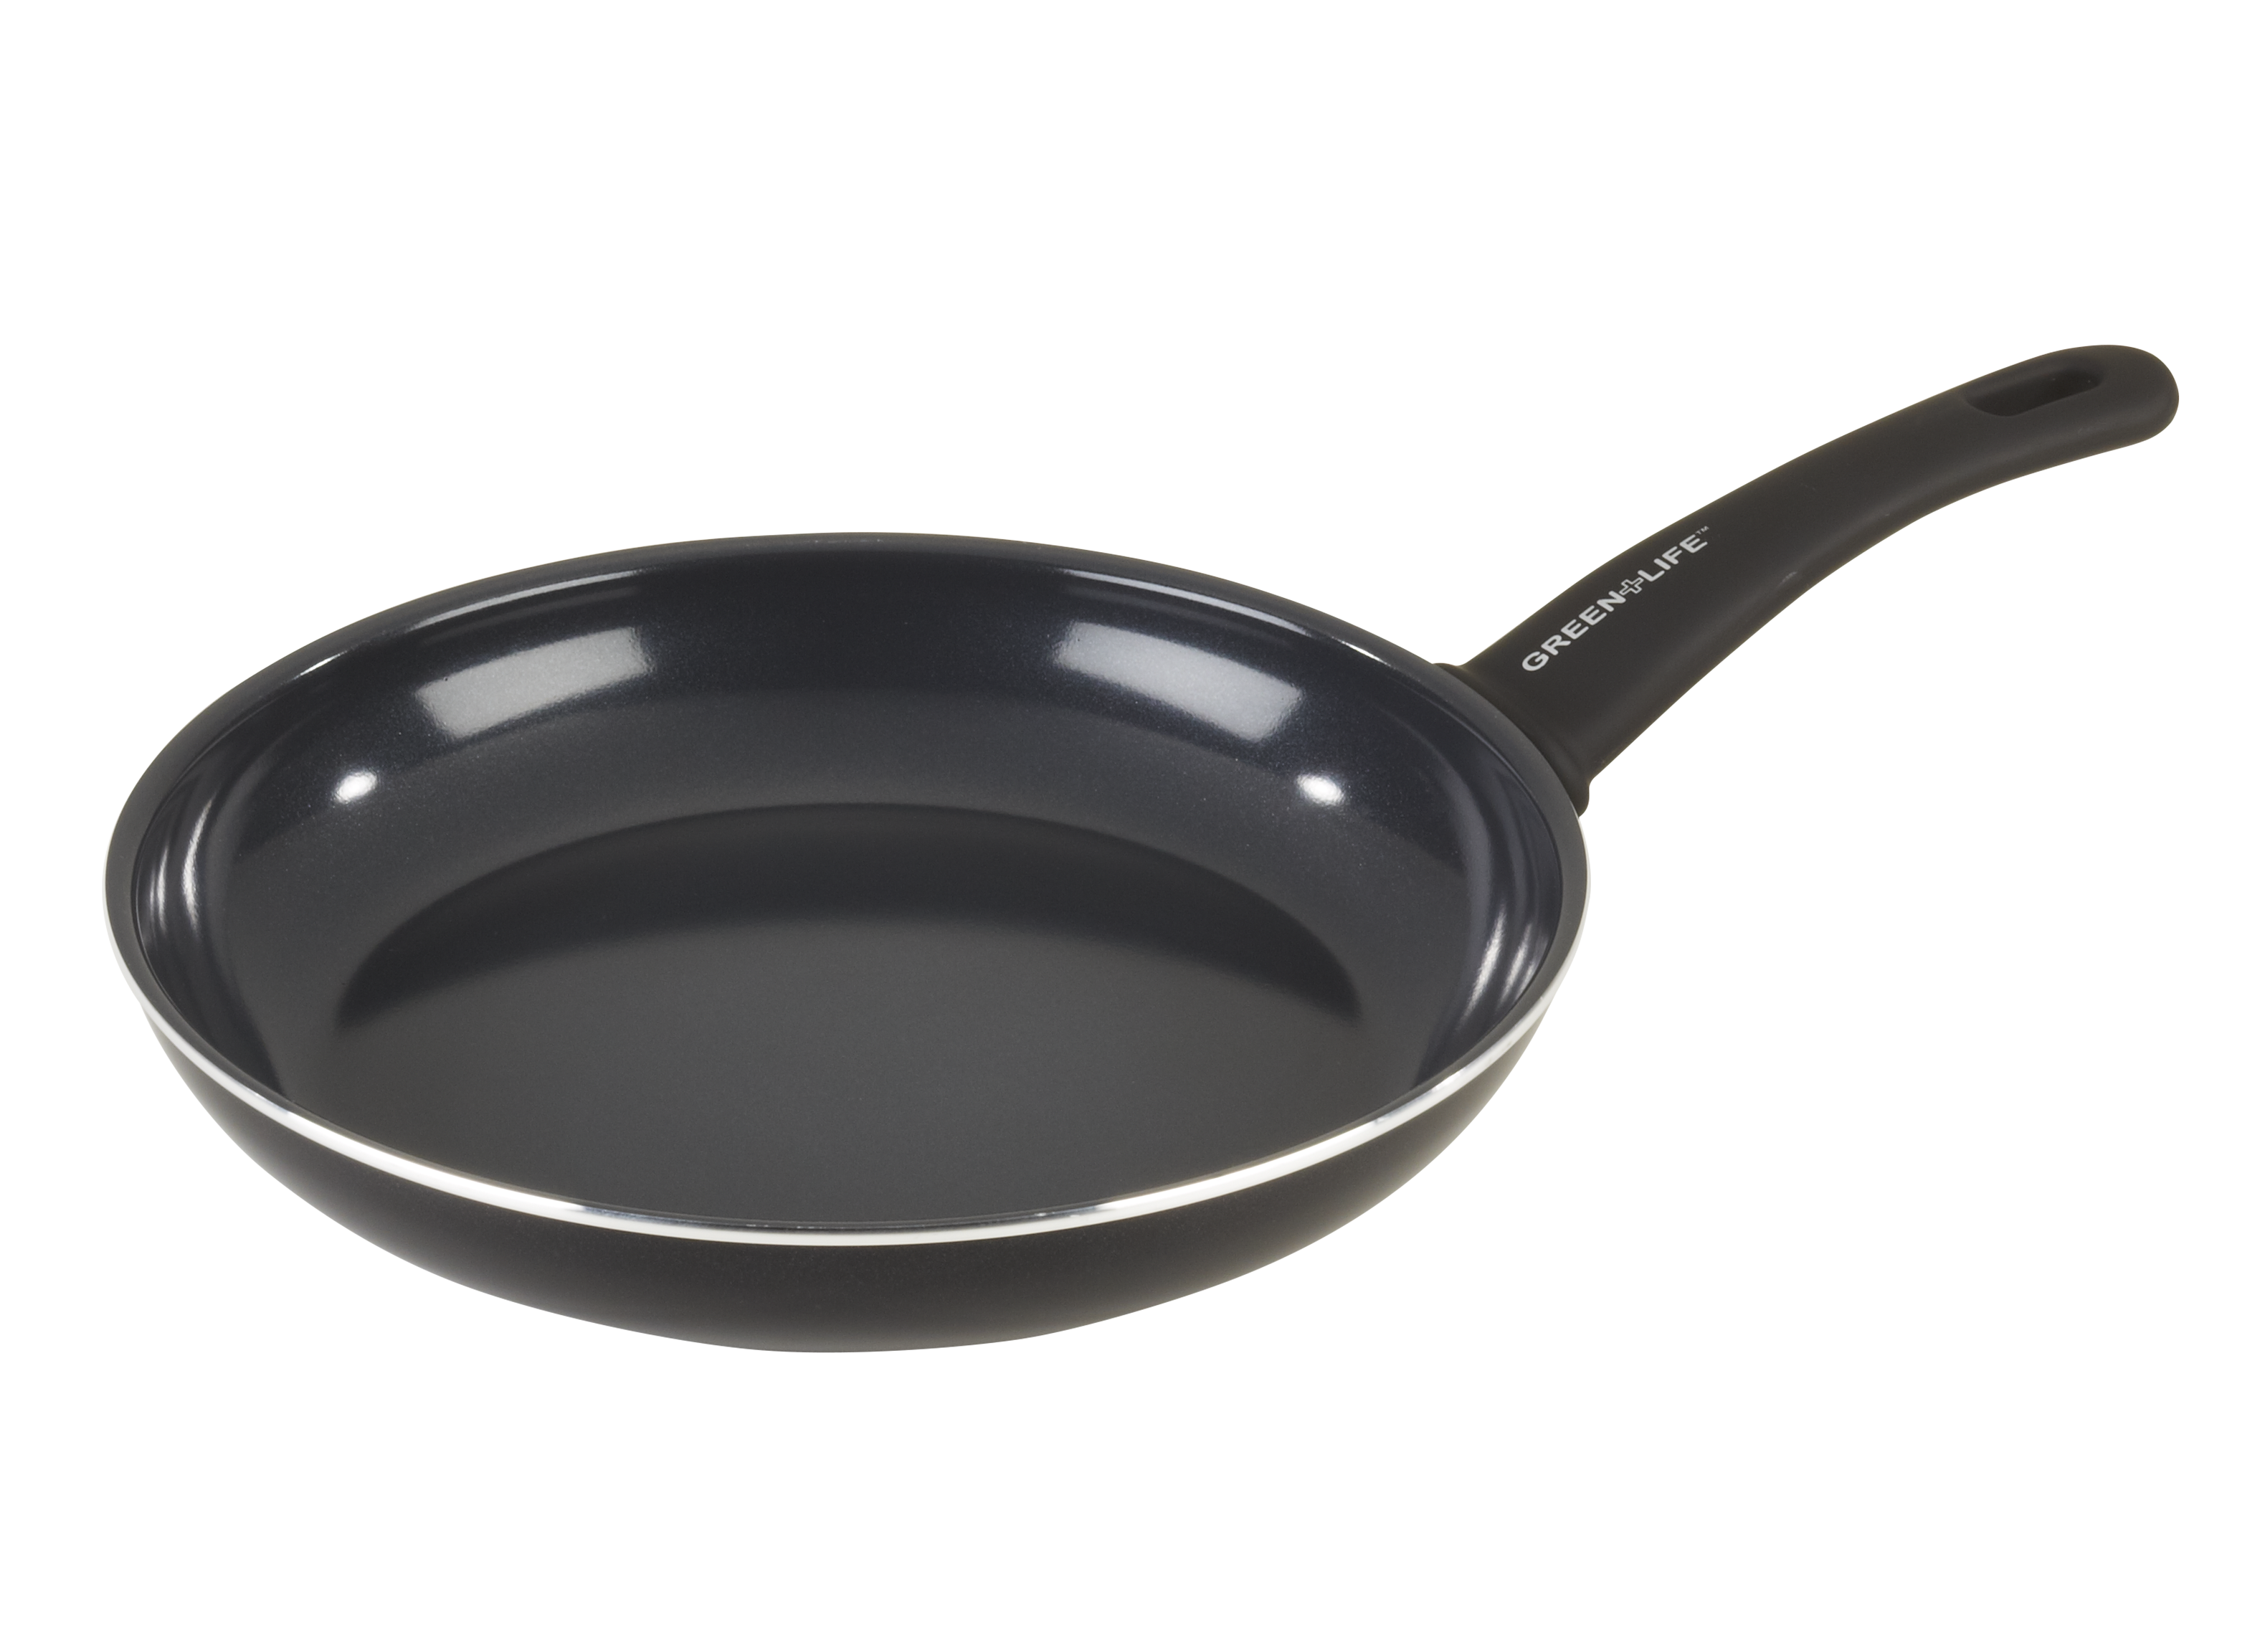 https://crdms.images.consumerreports.org/prod/products/cr/models/393500-fryingpans-greenlife-softgrips.png